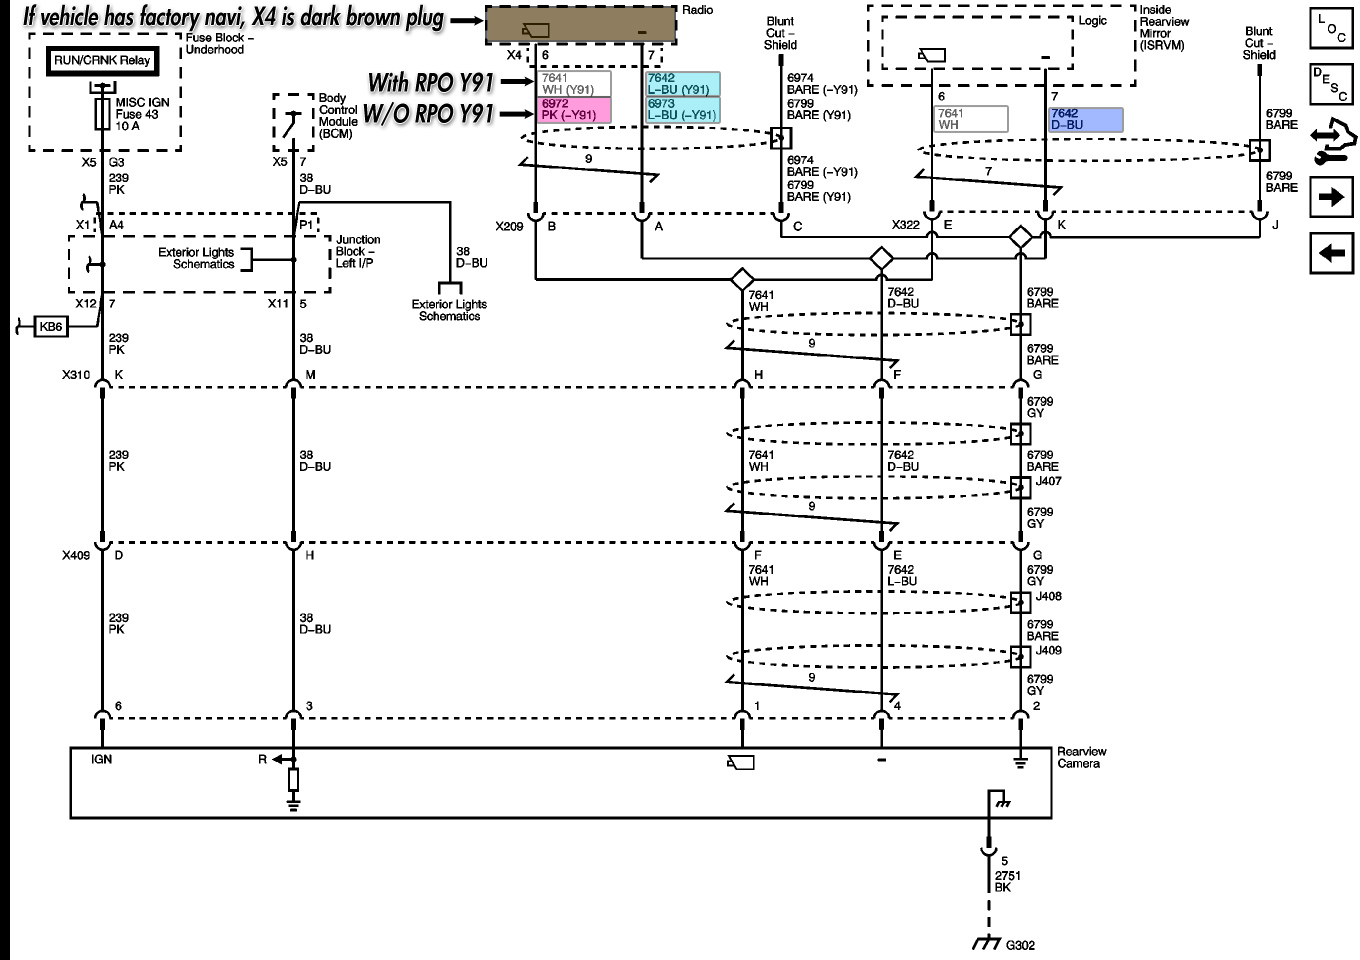 2006 Dodge Ram 1500 Stereo Wiring Diagram from www.adcmobile.com